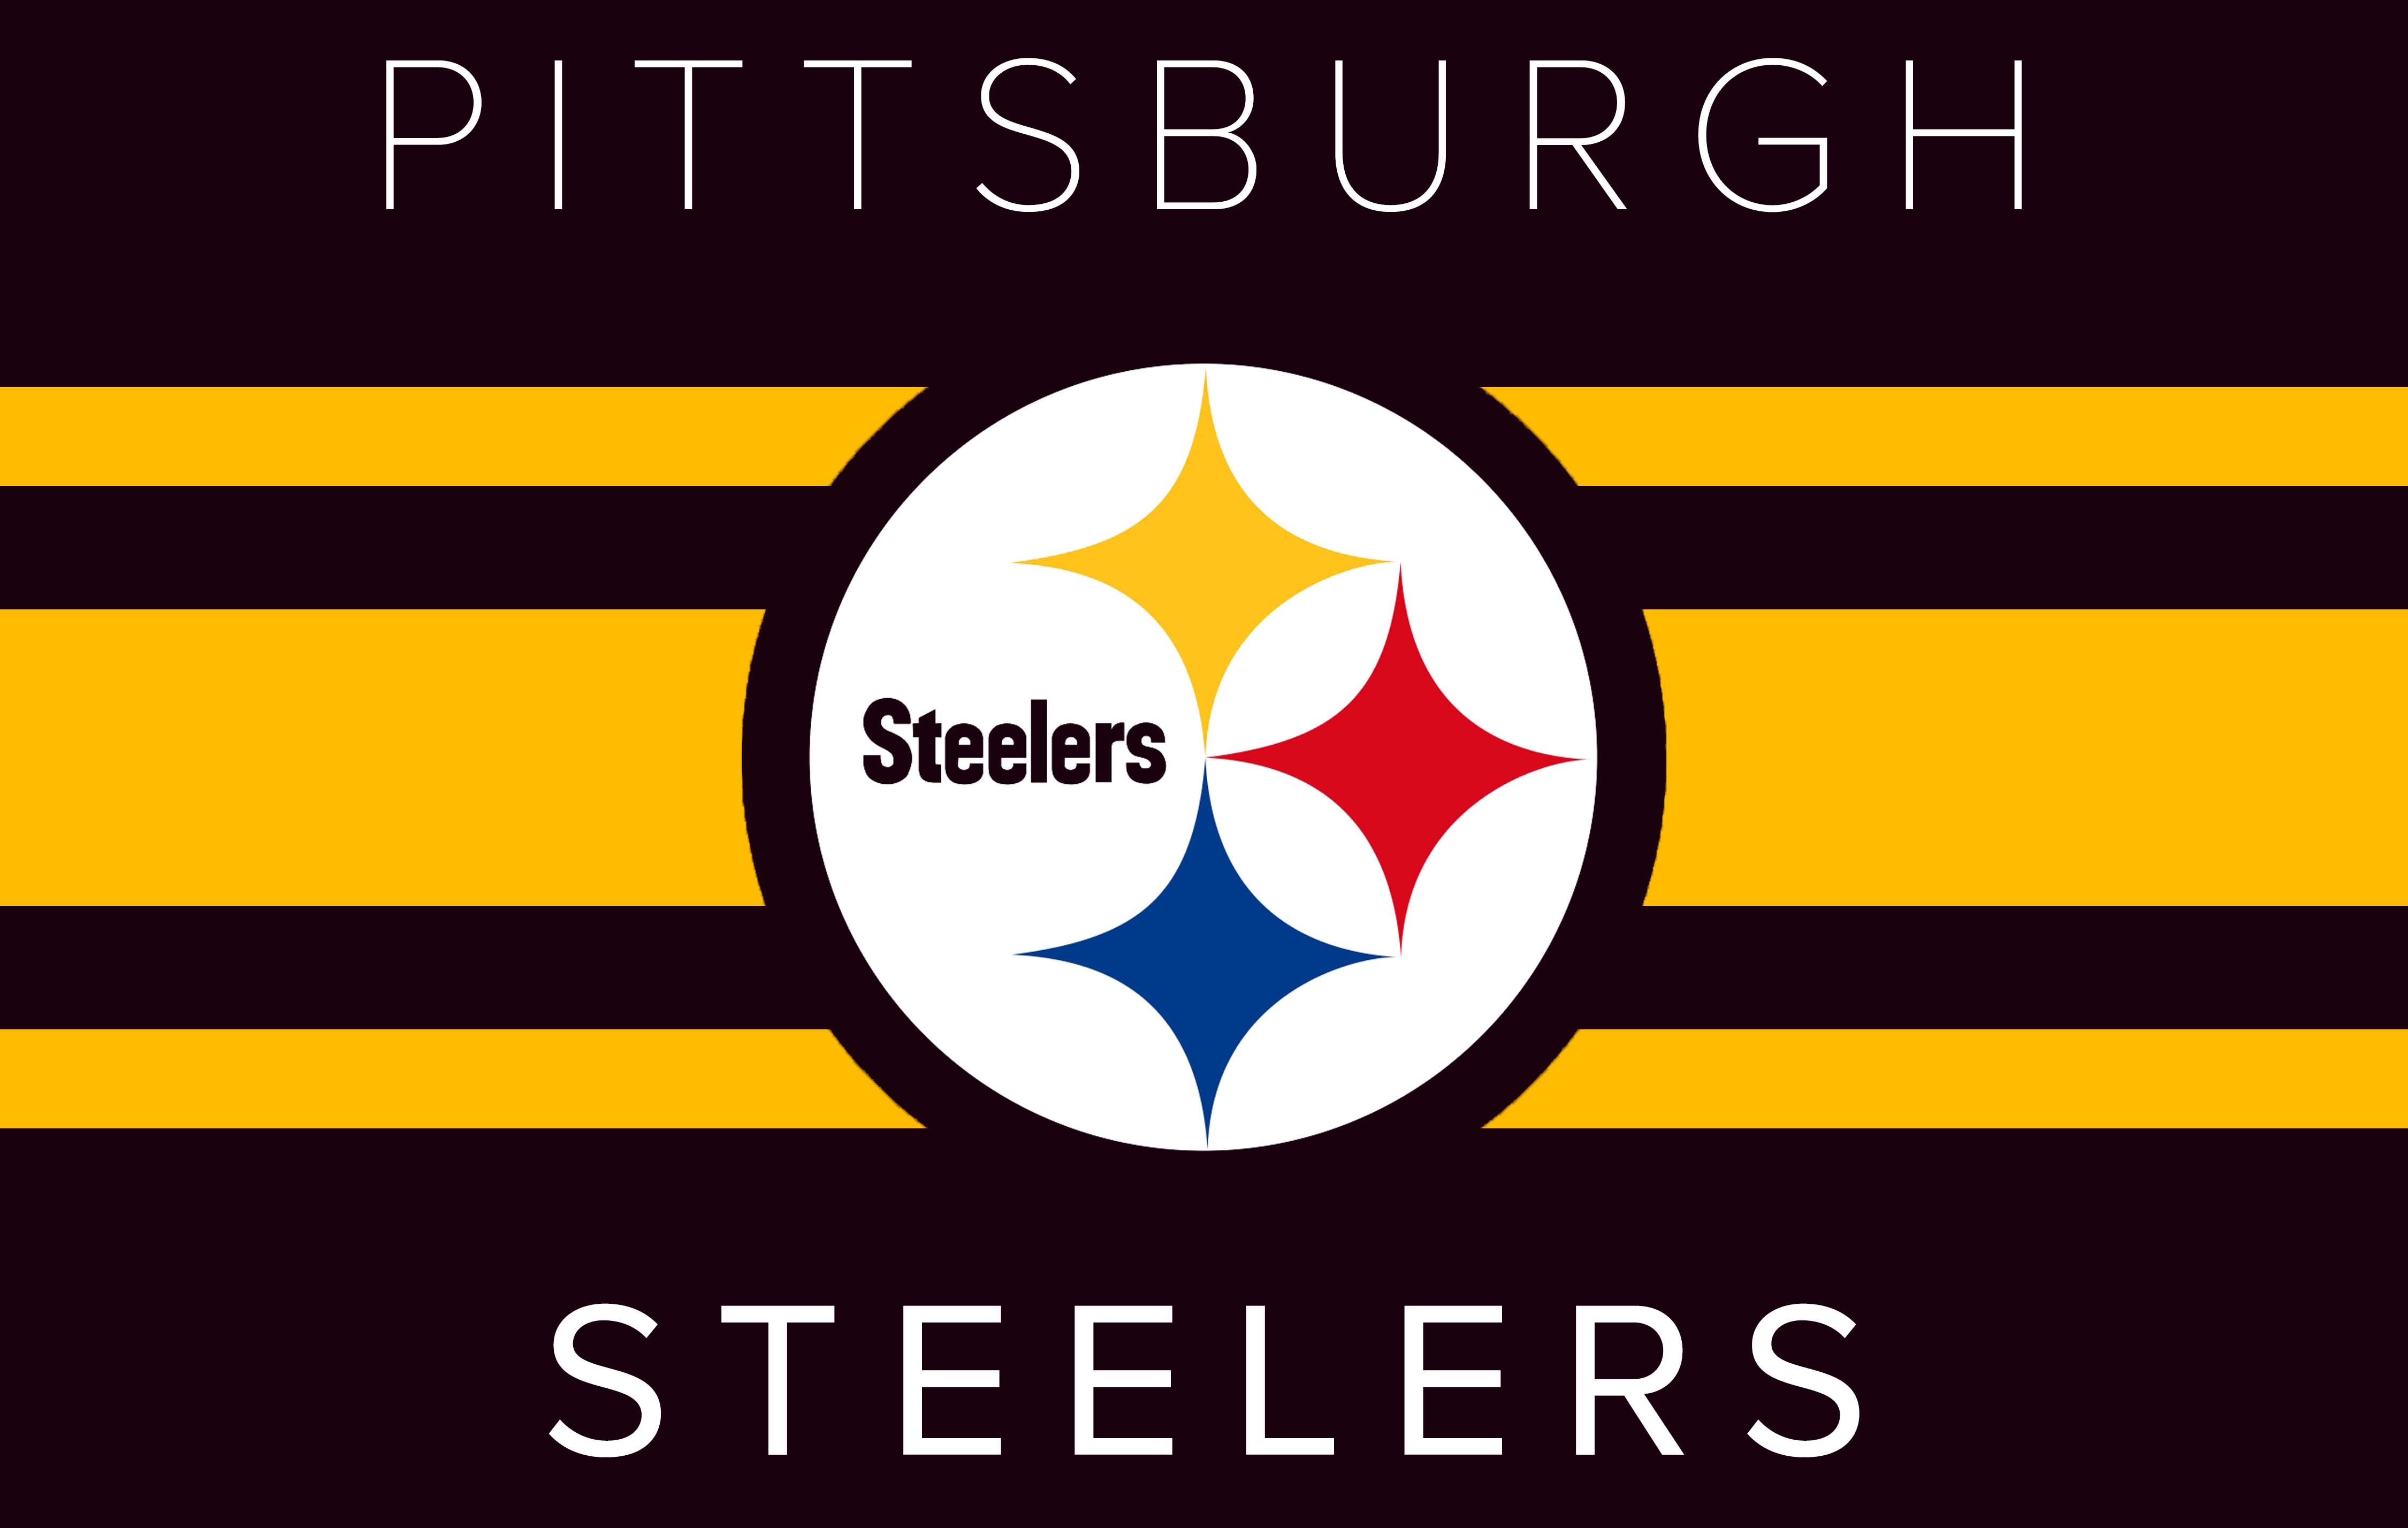 steelers background 5. Background Check All